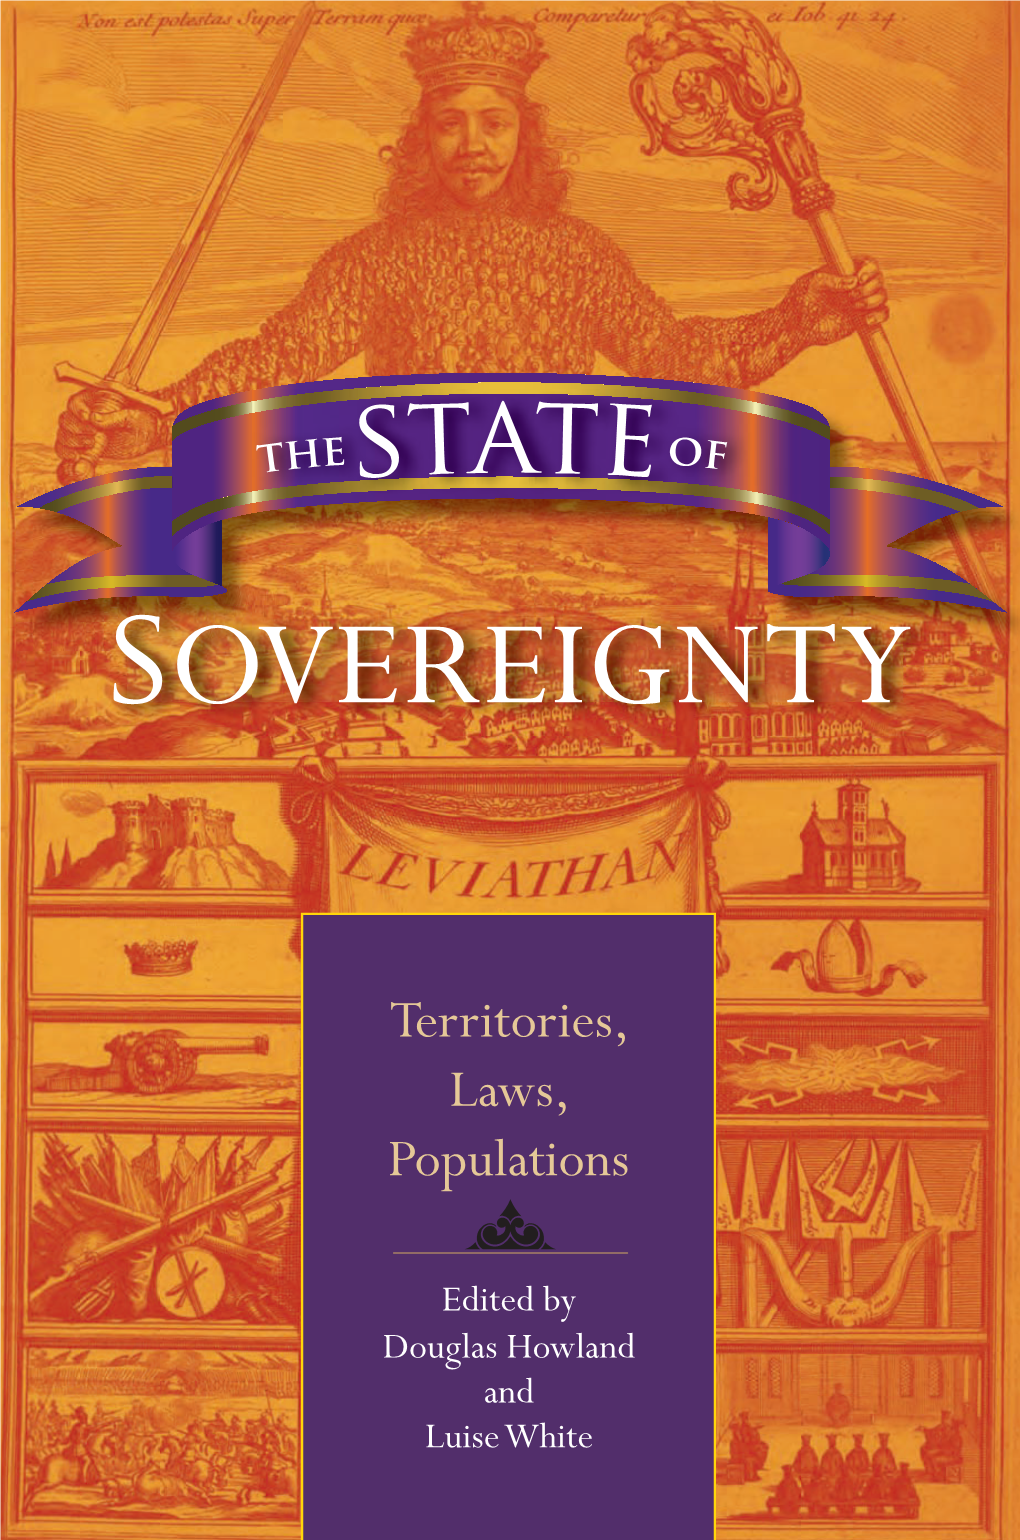 Sovereignty Is Socially Constructed the State of and That It Changes with Time and Place